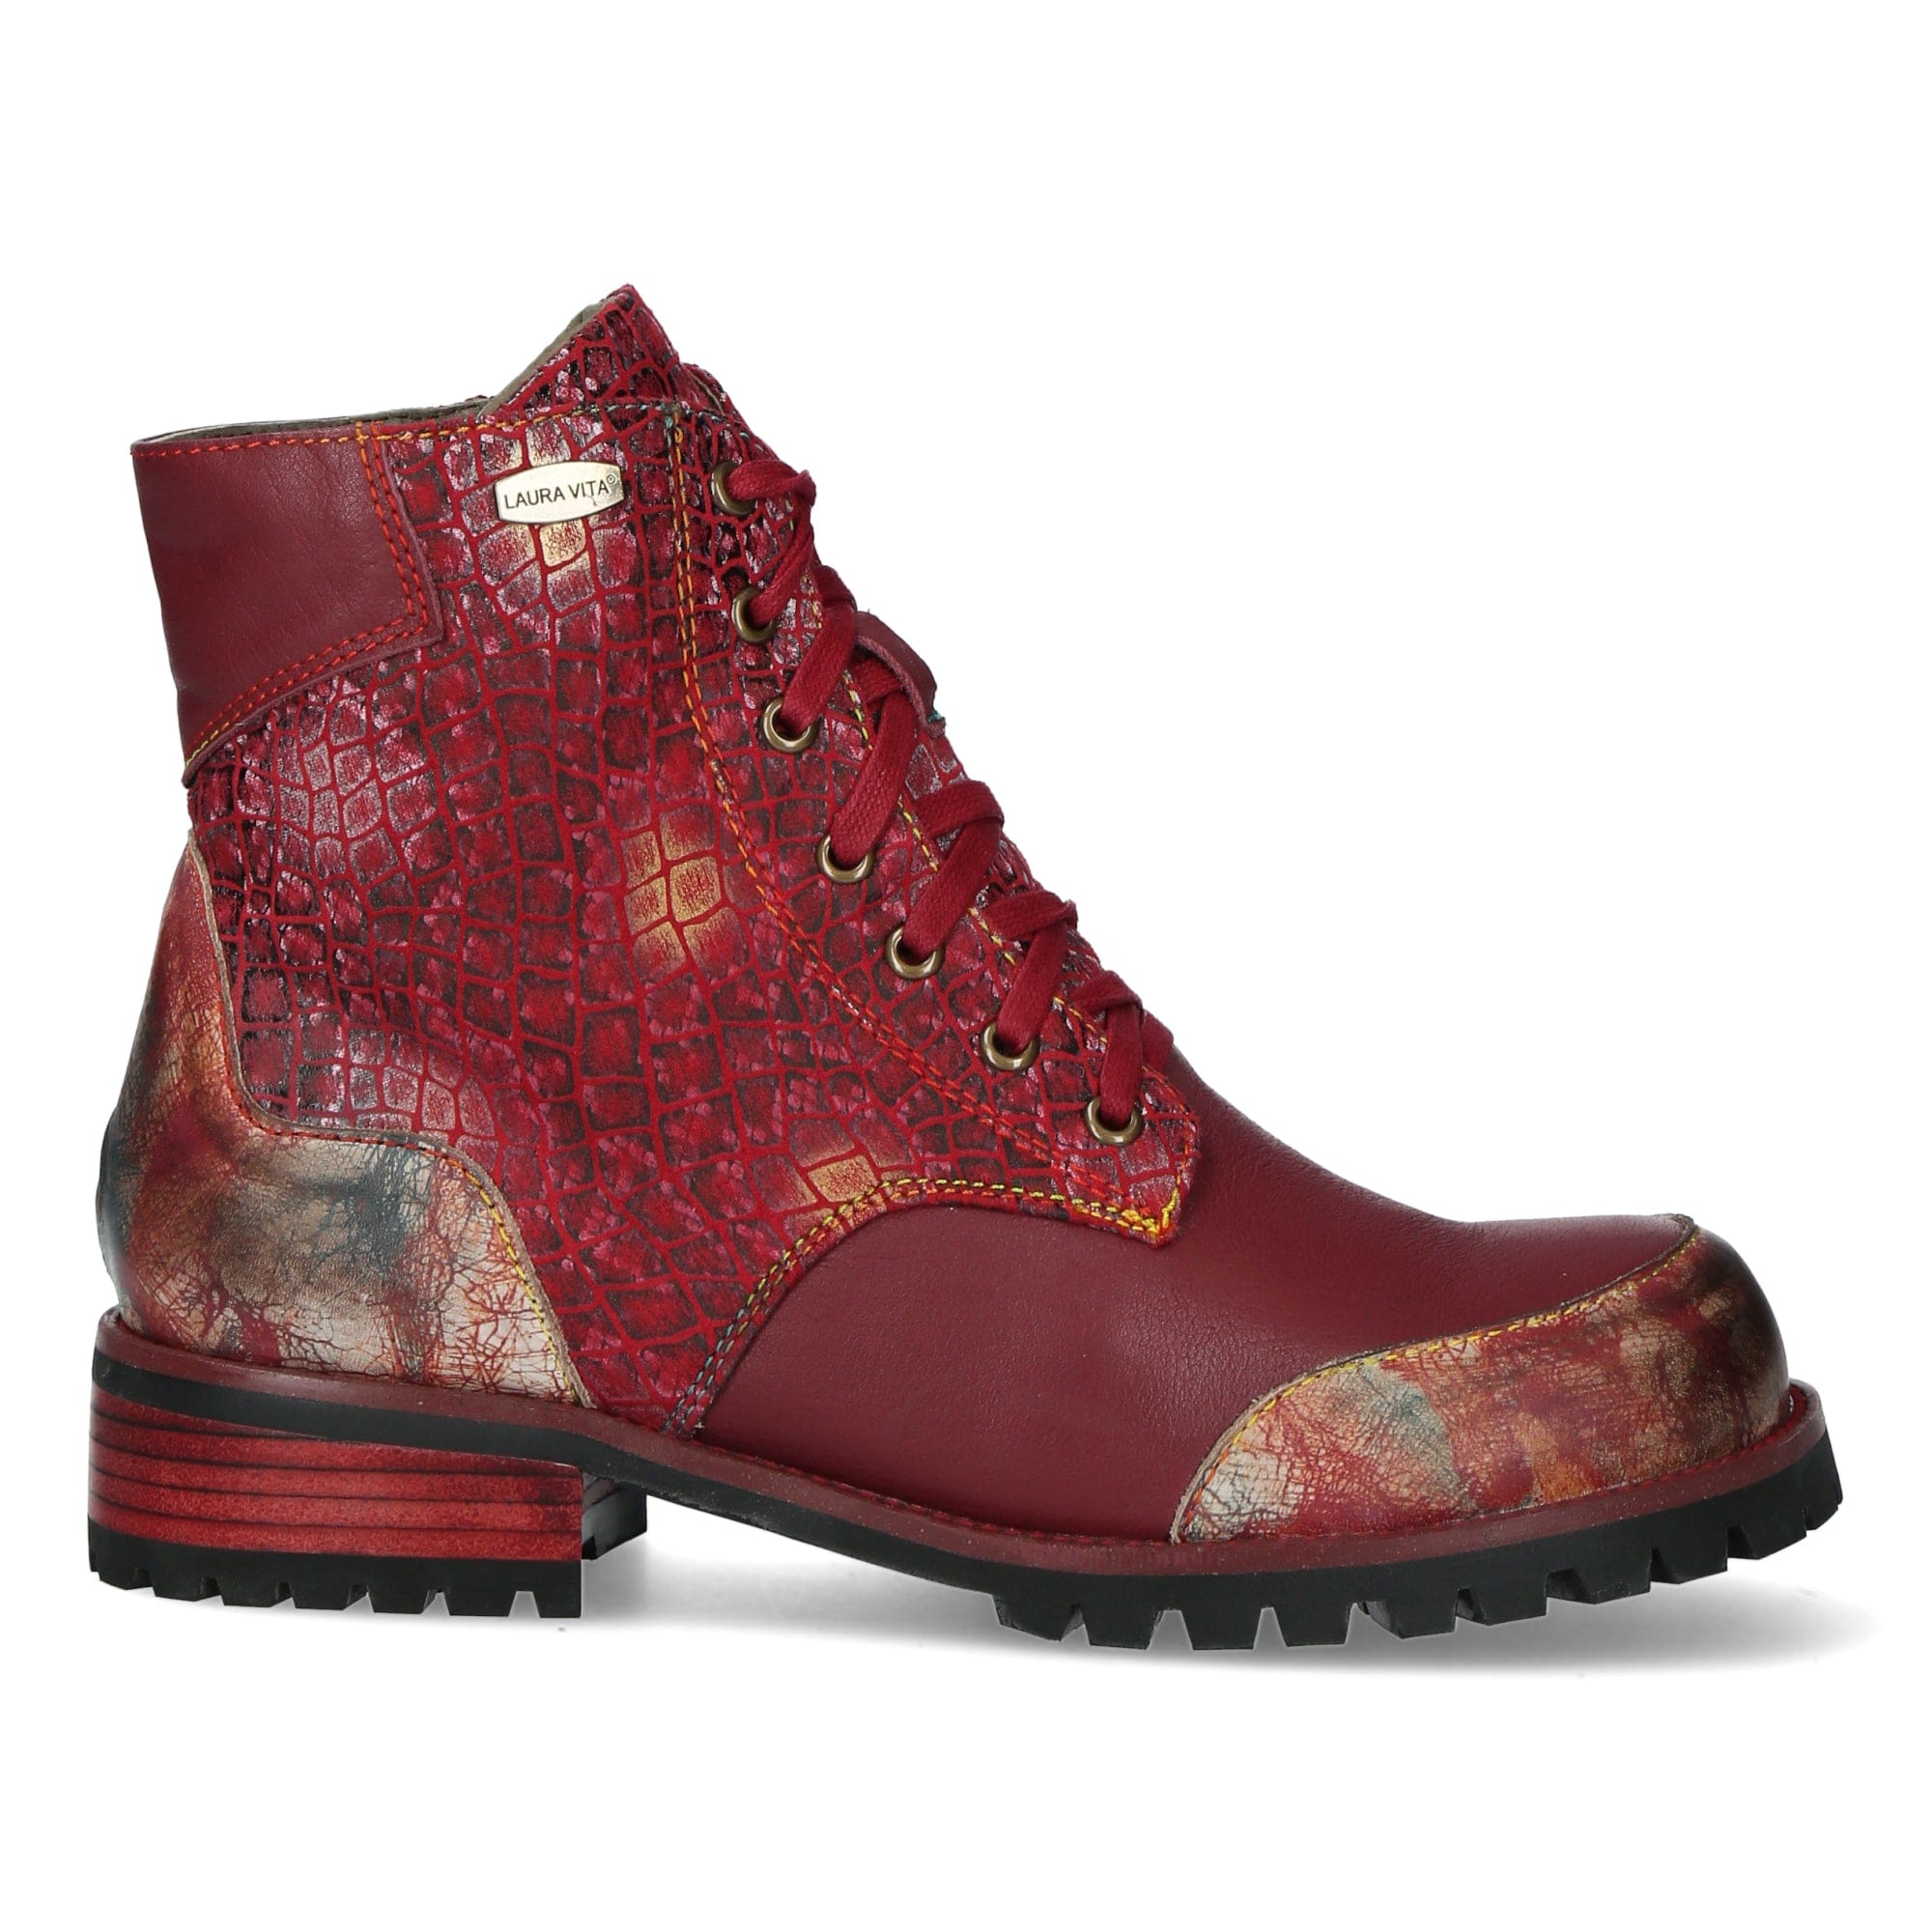 KANDYO 11A - 35 / Red - Boots